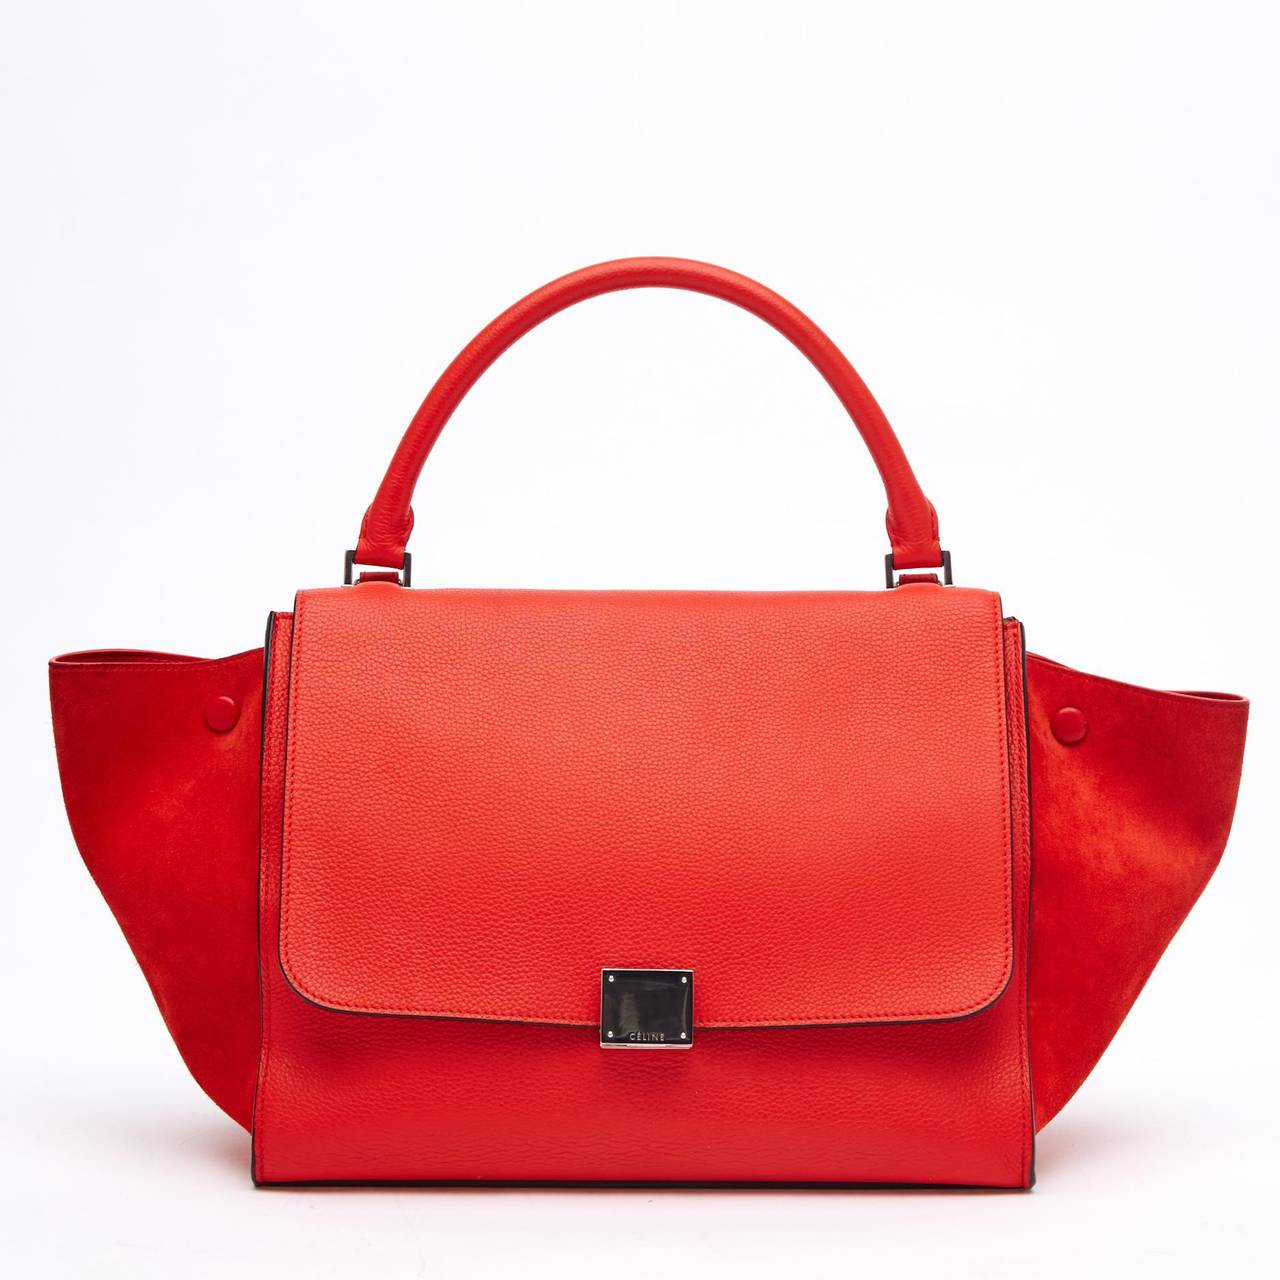 This authentic Celine Suede Trapeze in Medium is longed for by many, and it's no wonder why. This beautiful tote is constructed with blood orange leather and soft matching suede on the wings. It is accented with a silver opening buckle. Its soft